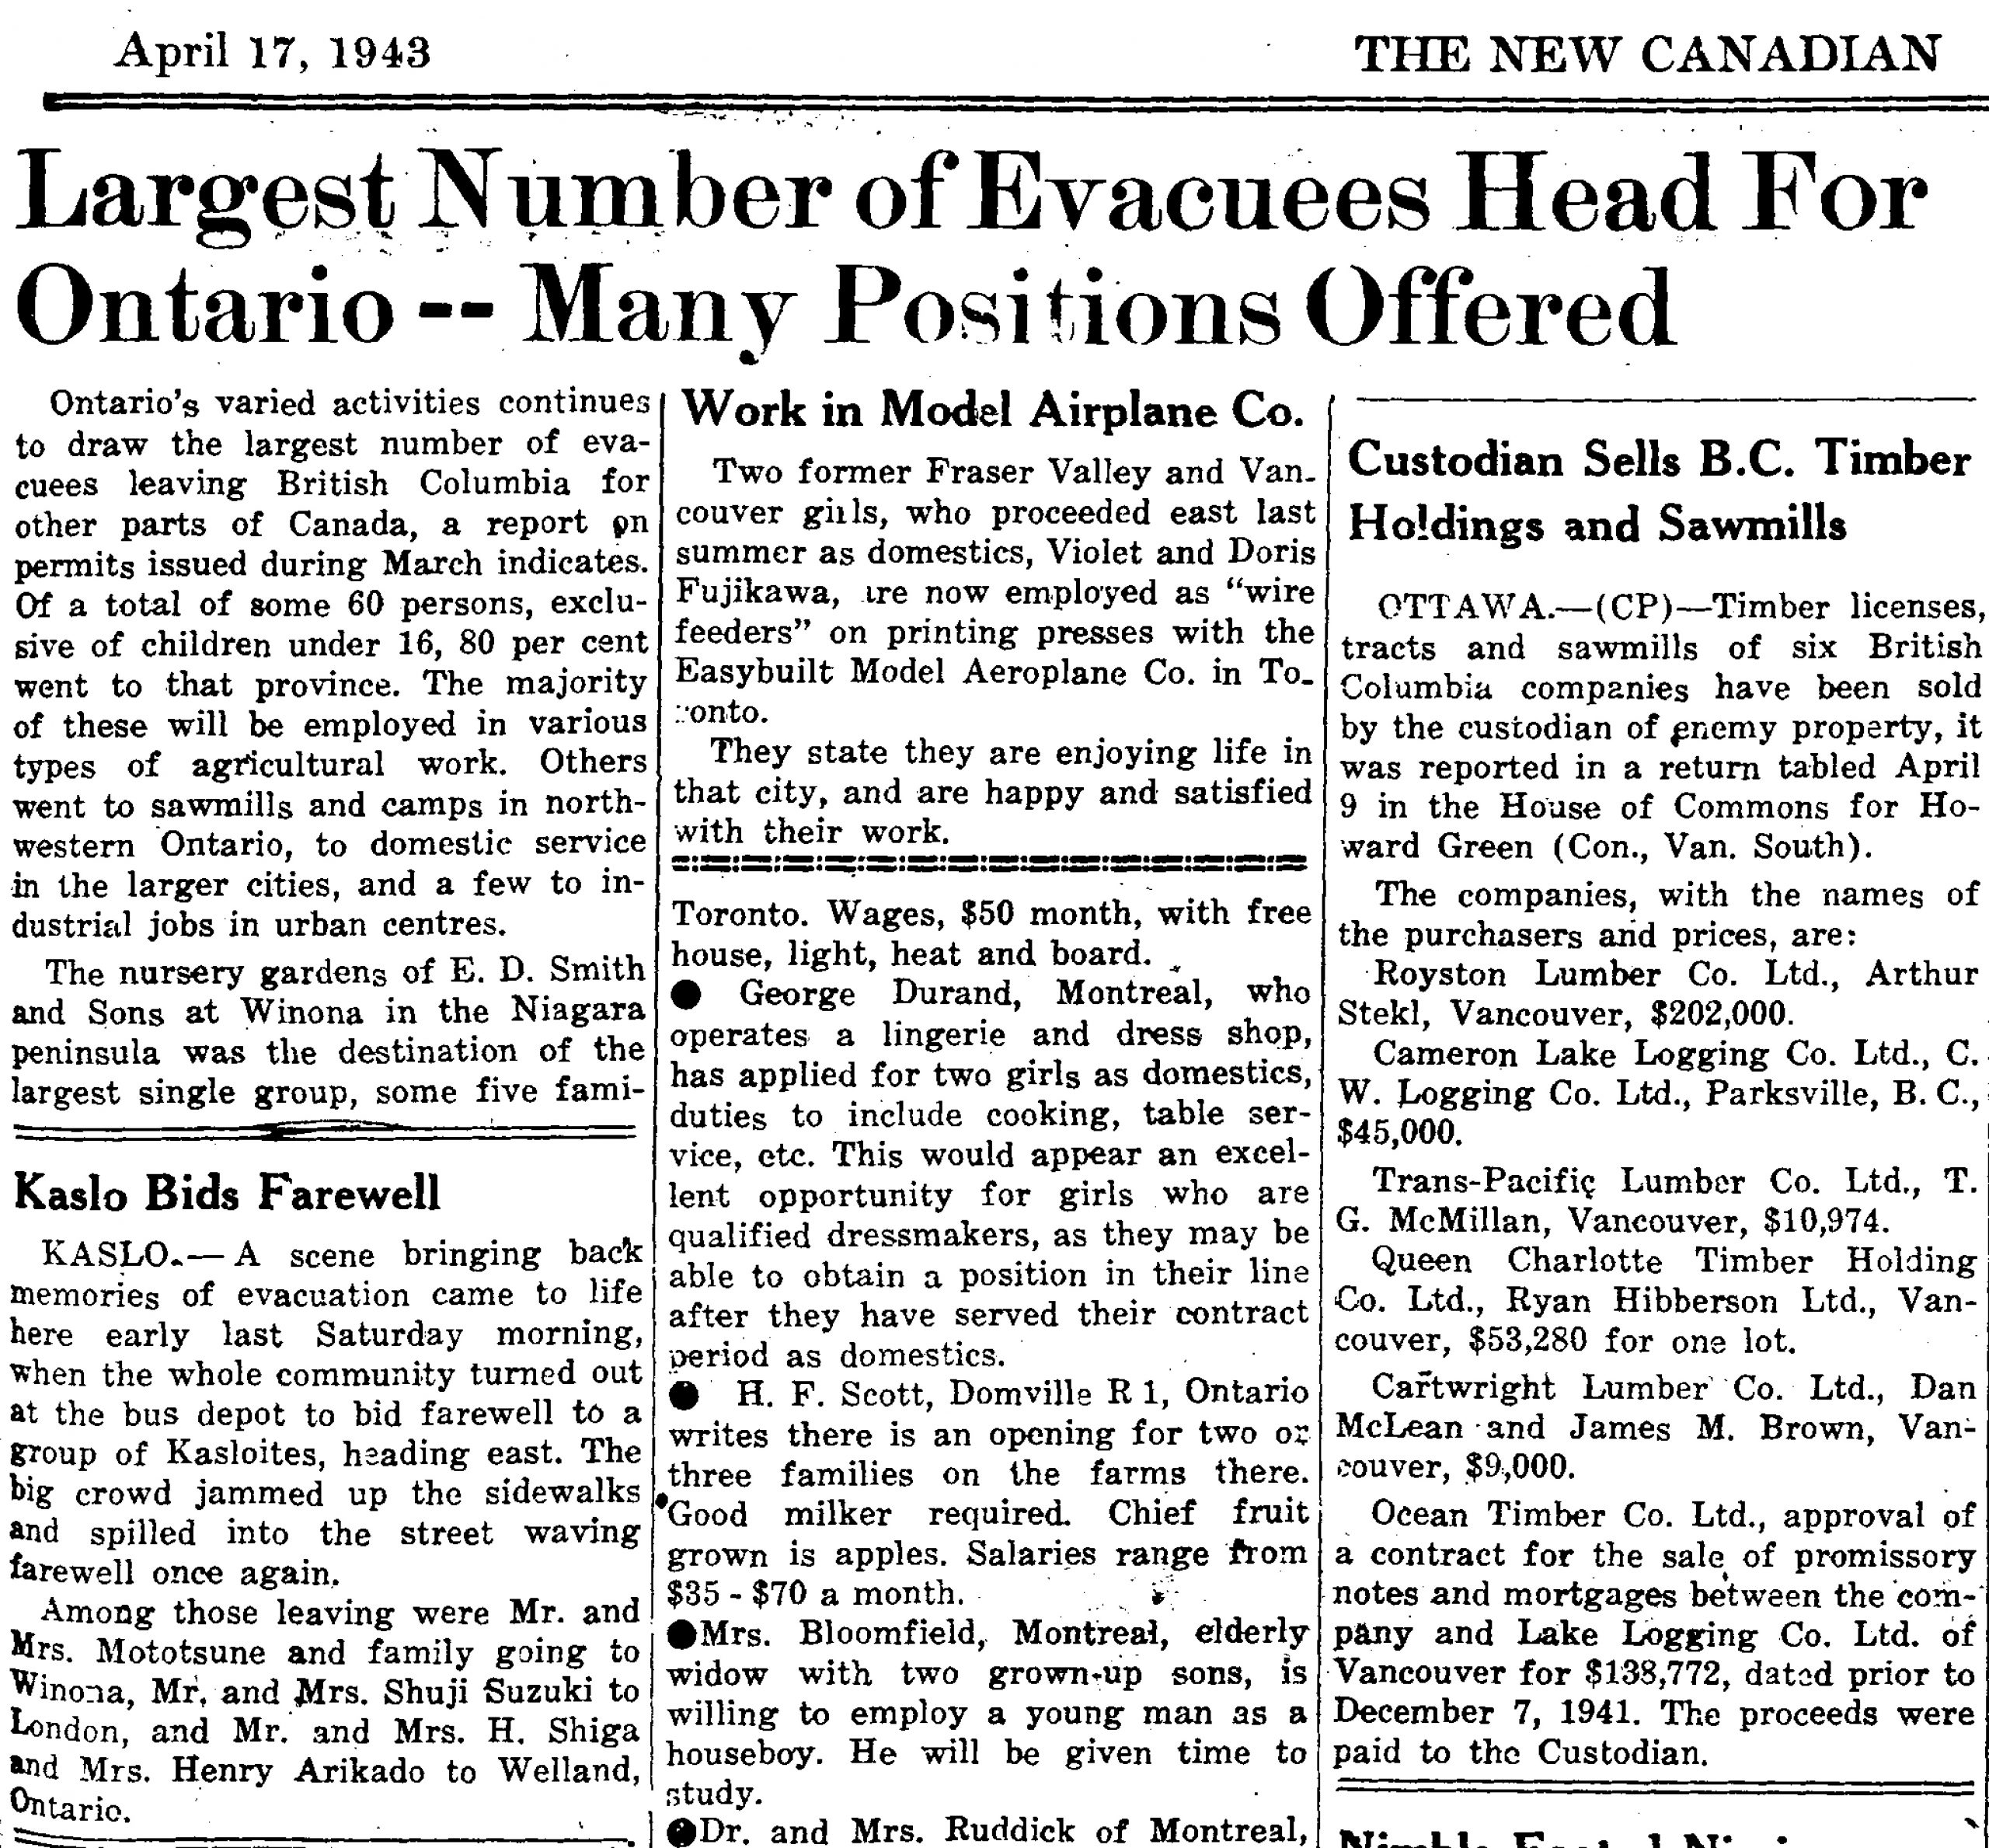 Newspaper clipping titled Largest Number of Evacuees Head for Ontario - Many positions offered